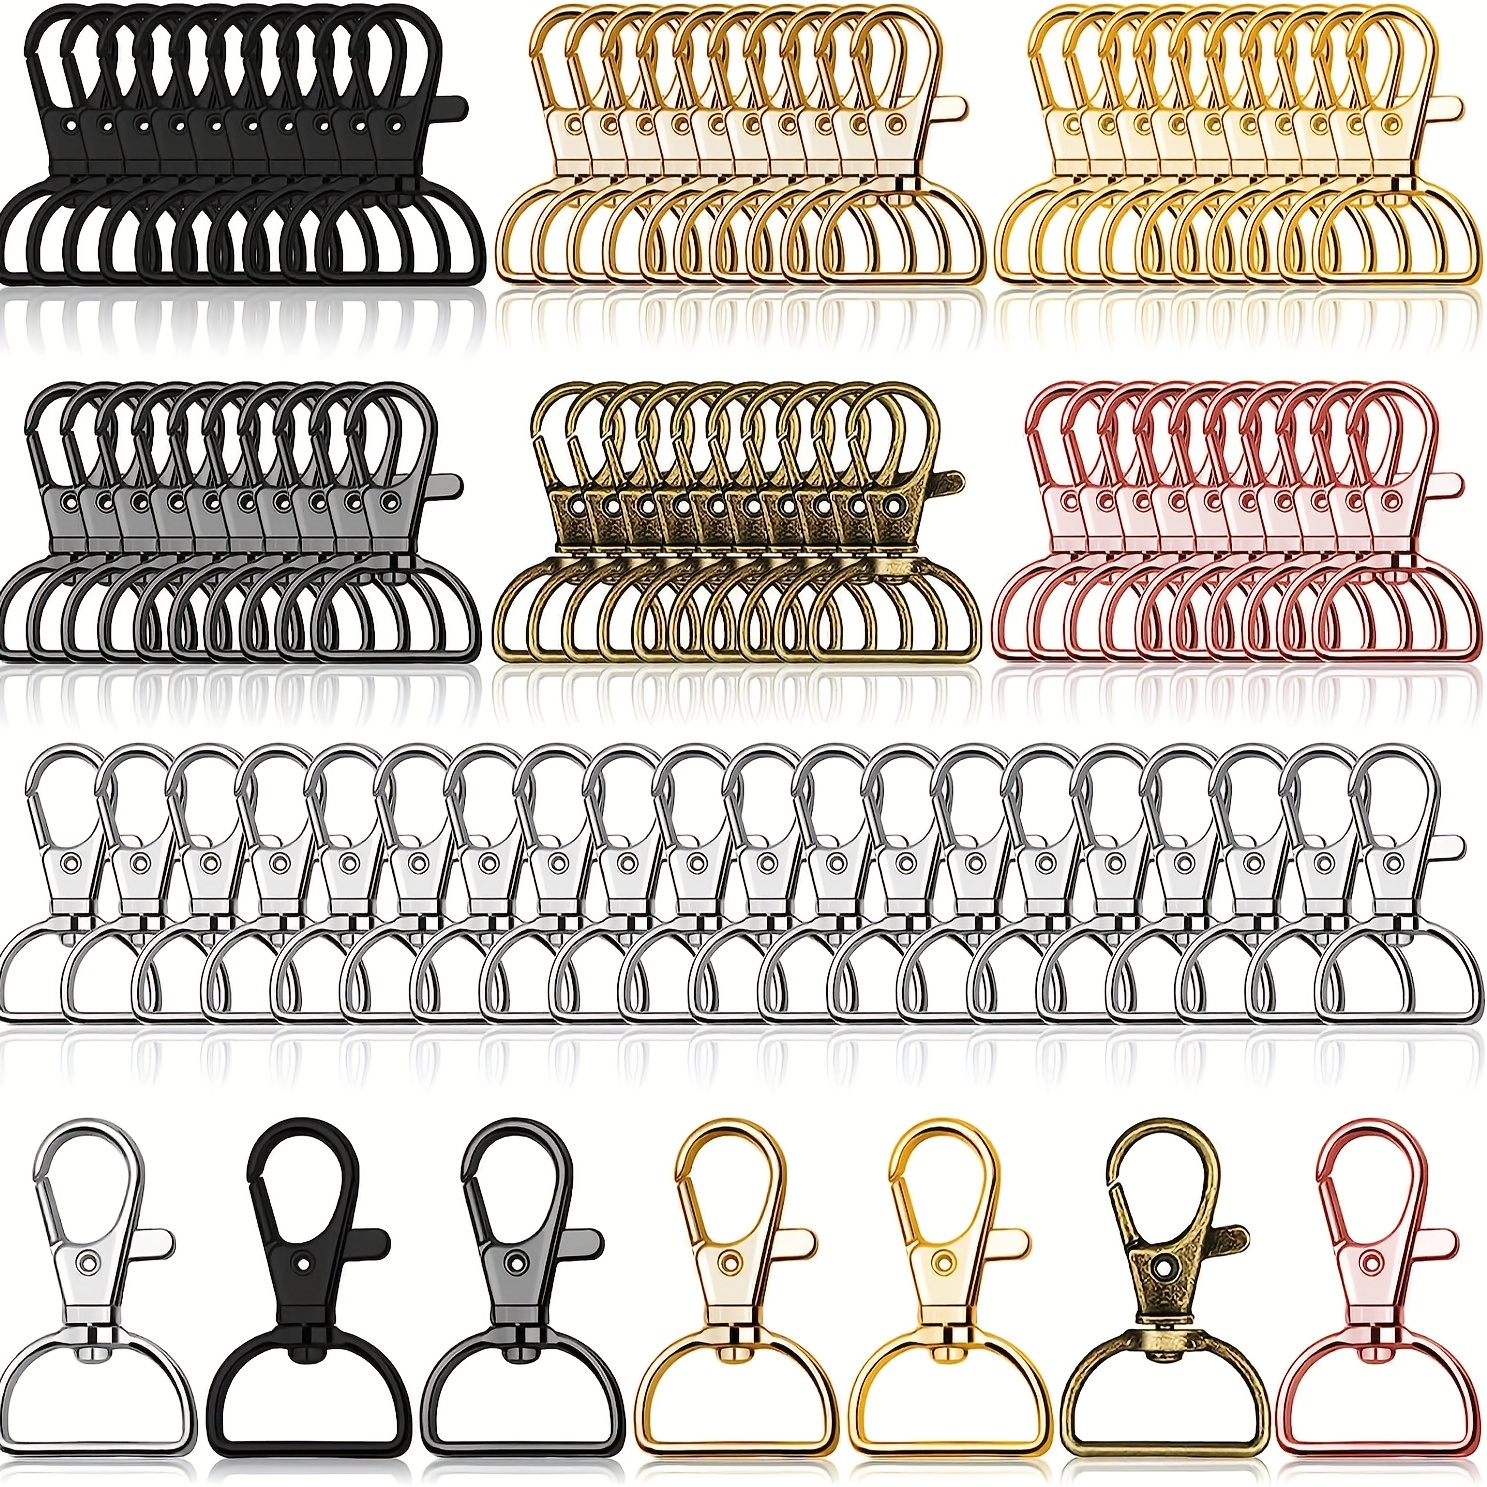 

80pcs Rotating D-shaped Lobster Clasp, Hanging Rope Buckle, Keychain, Colorful Dog Buckle For Diy Luggage Accessory, Pet Leather Rope Lock Buckle, Bag Accessories